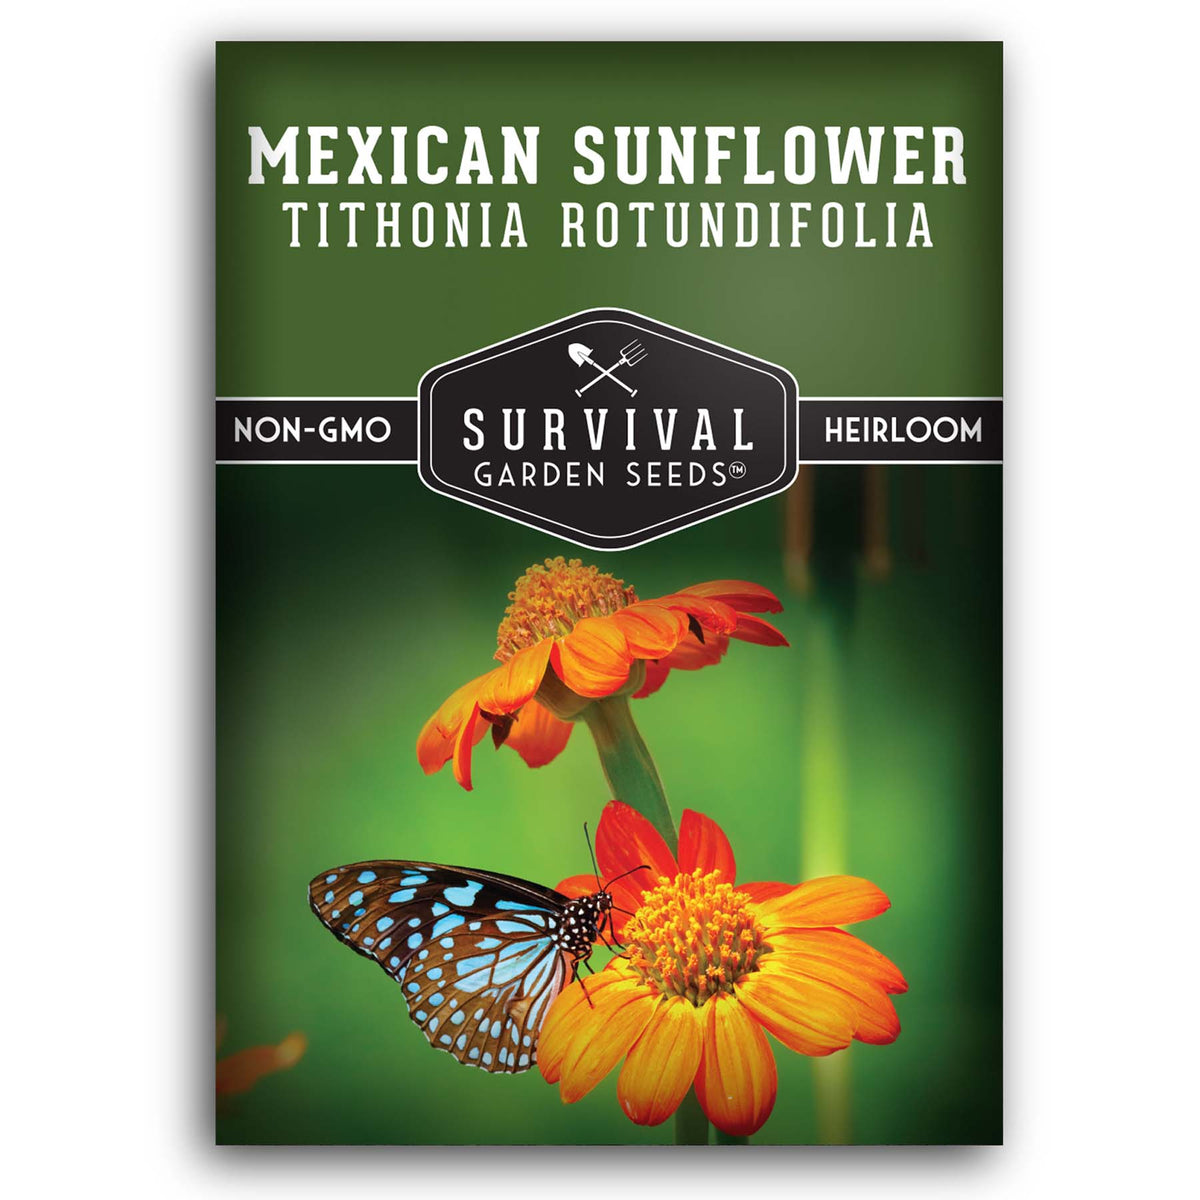 Mexican Sunflower Seeds for planting